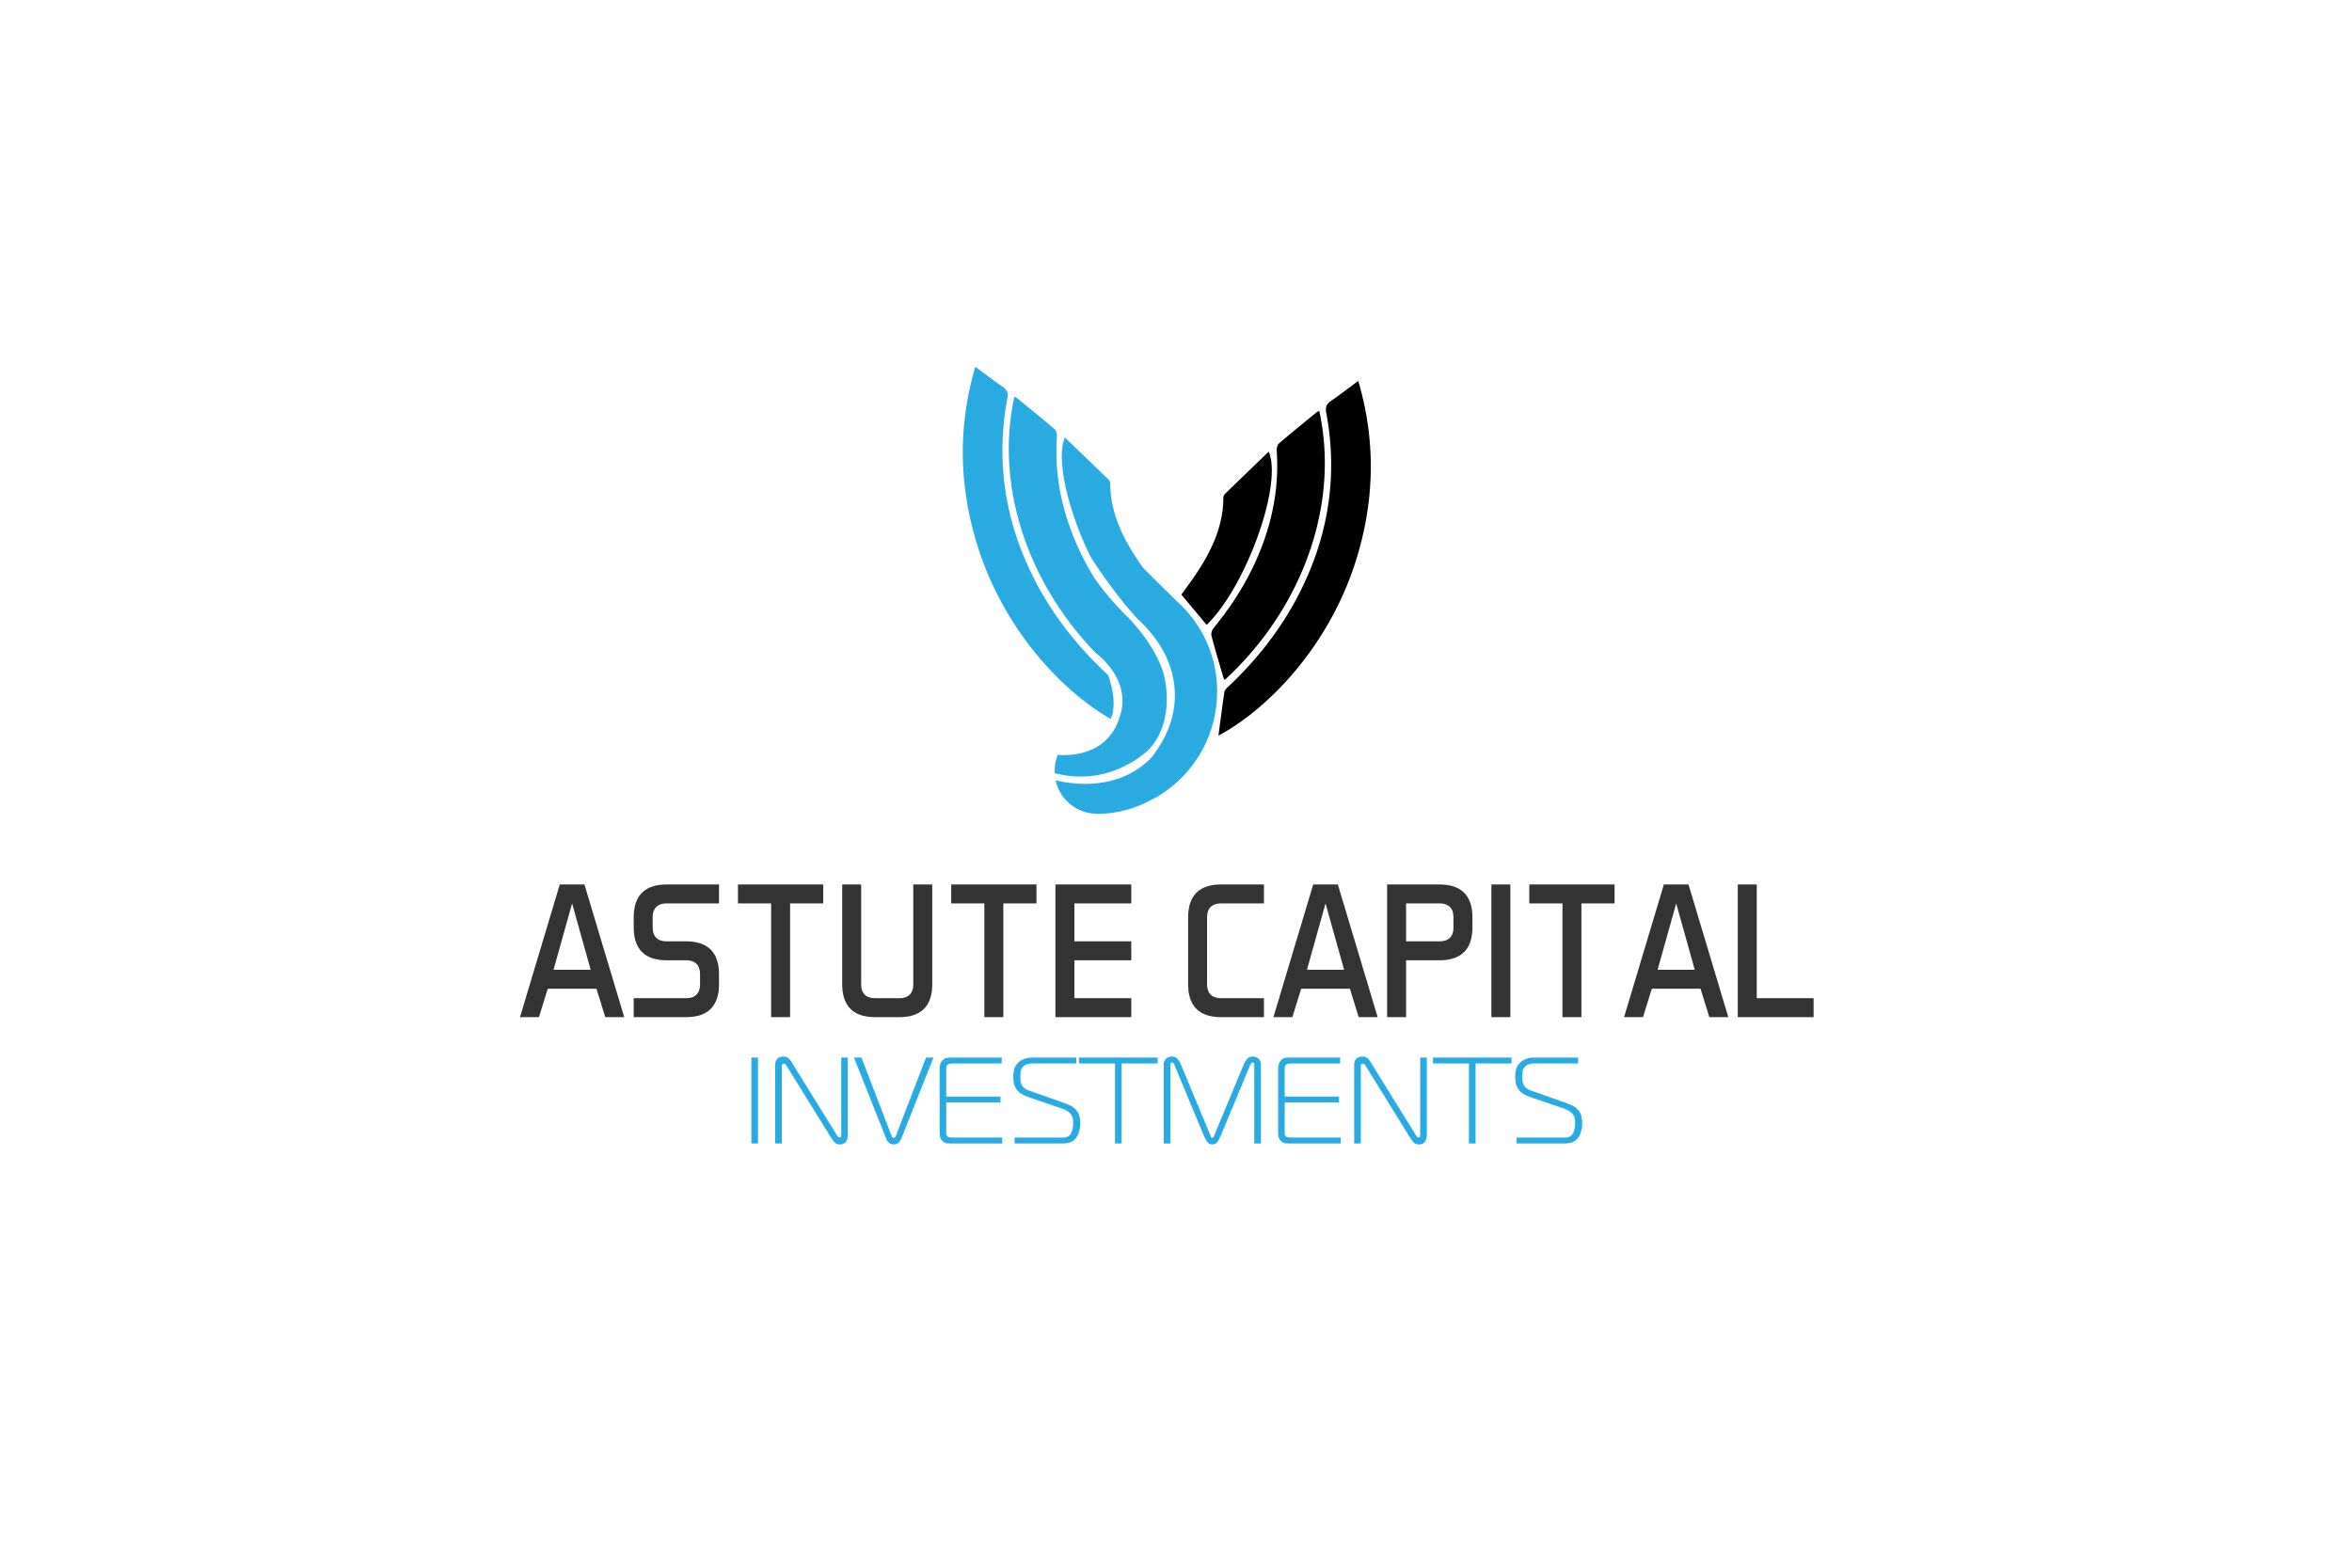 Astute Capital Investments